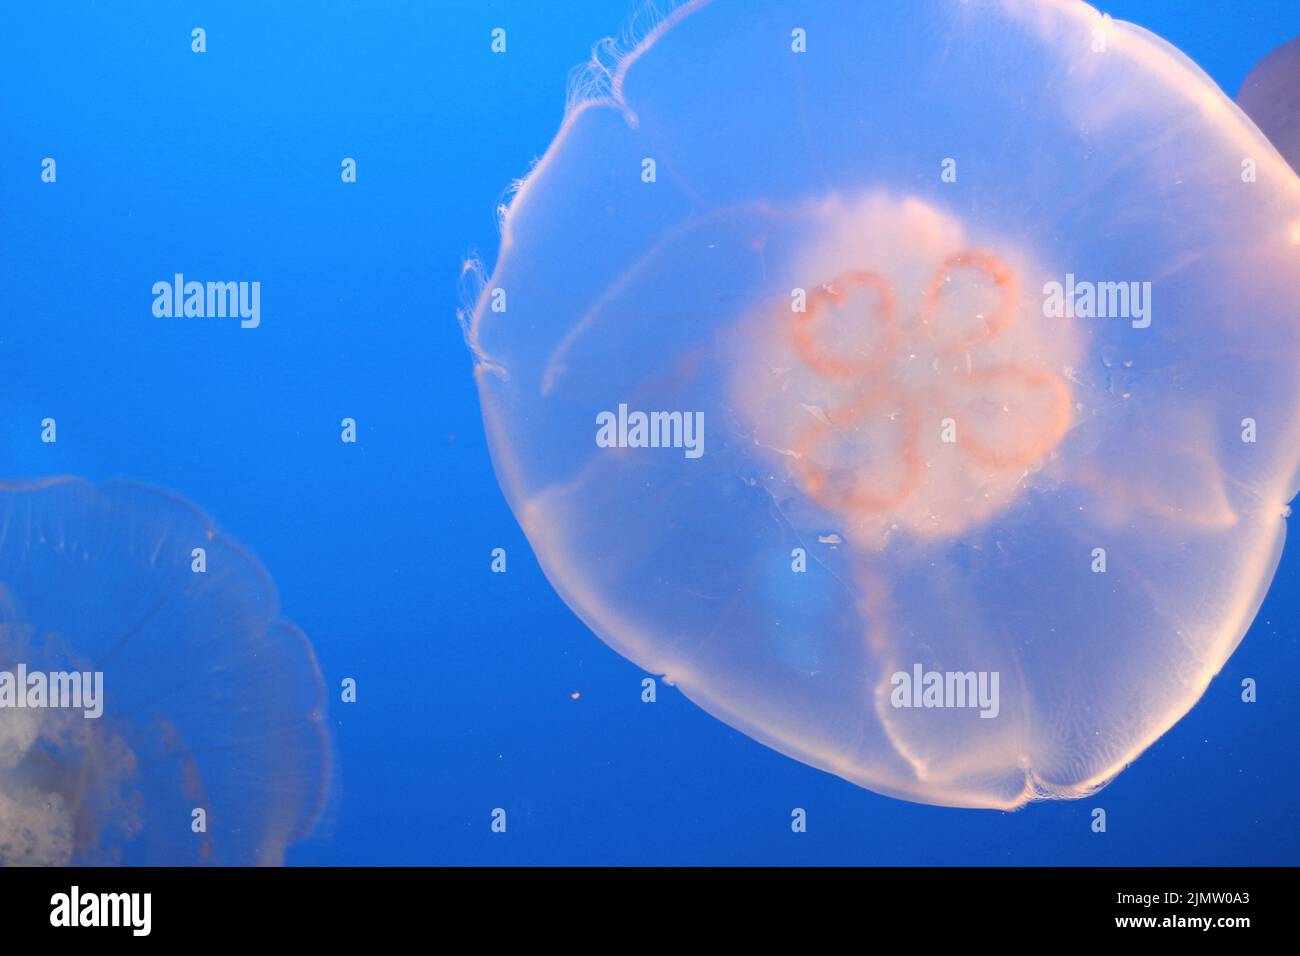 Beautiful, delicate white jellies float in deep blue water. Stock Photo